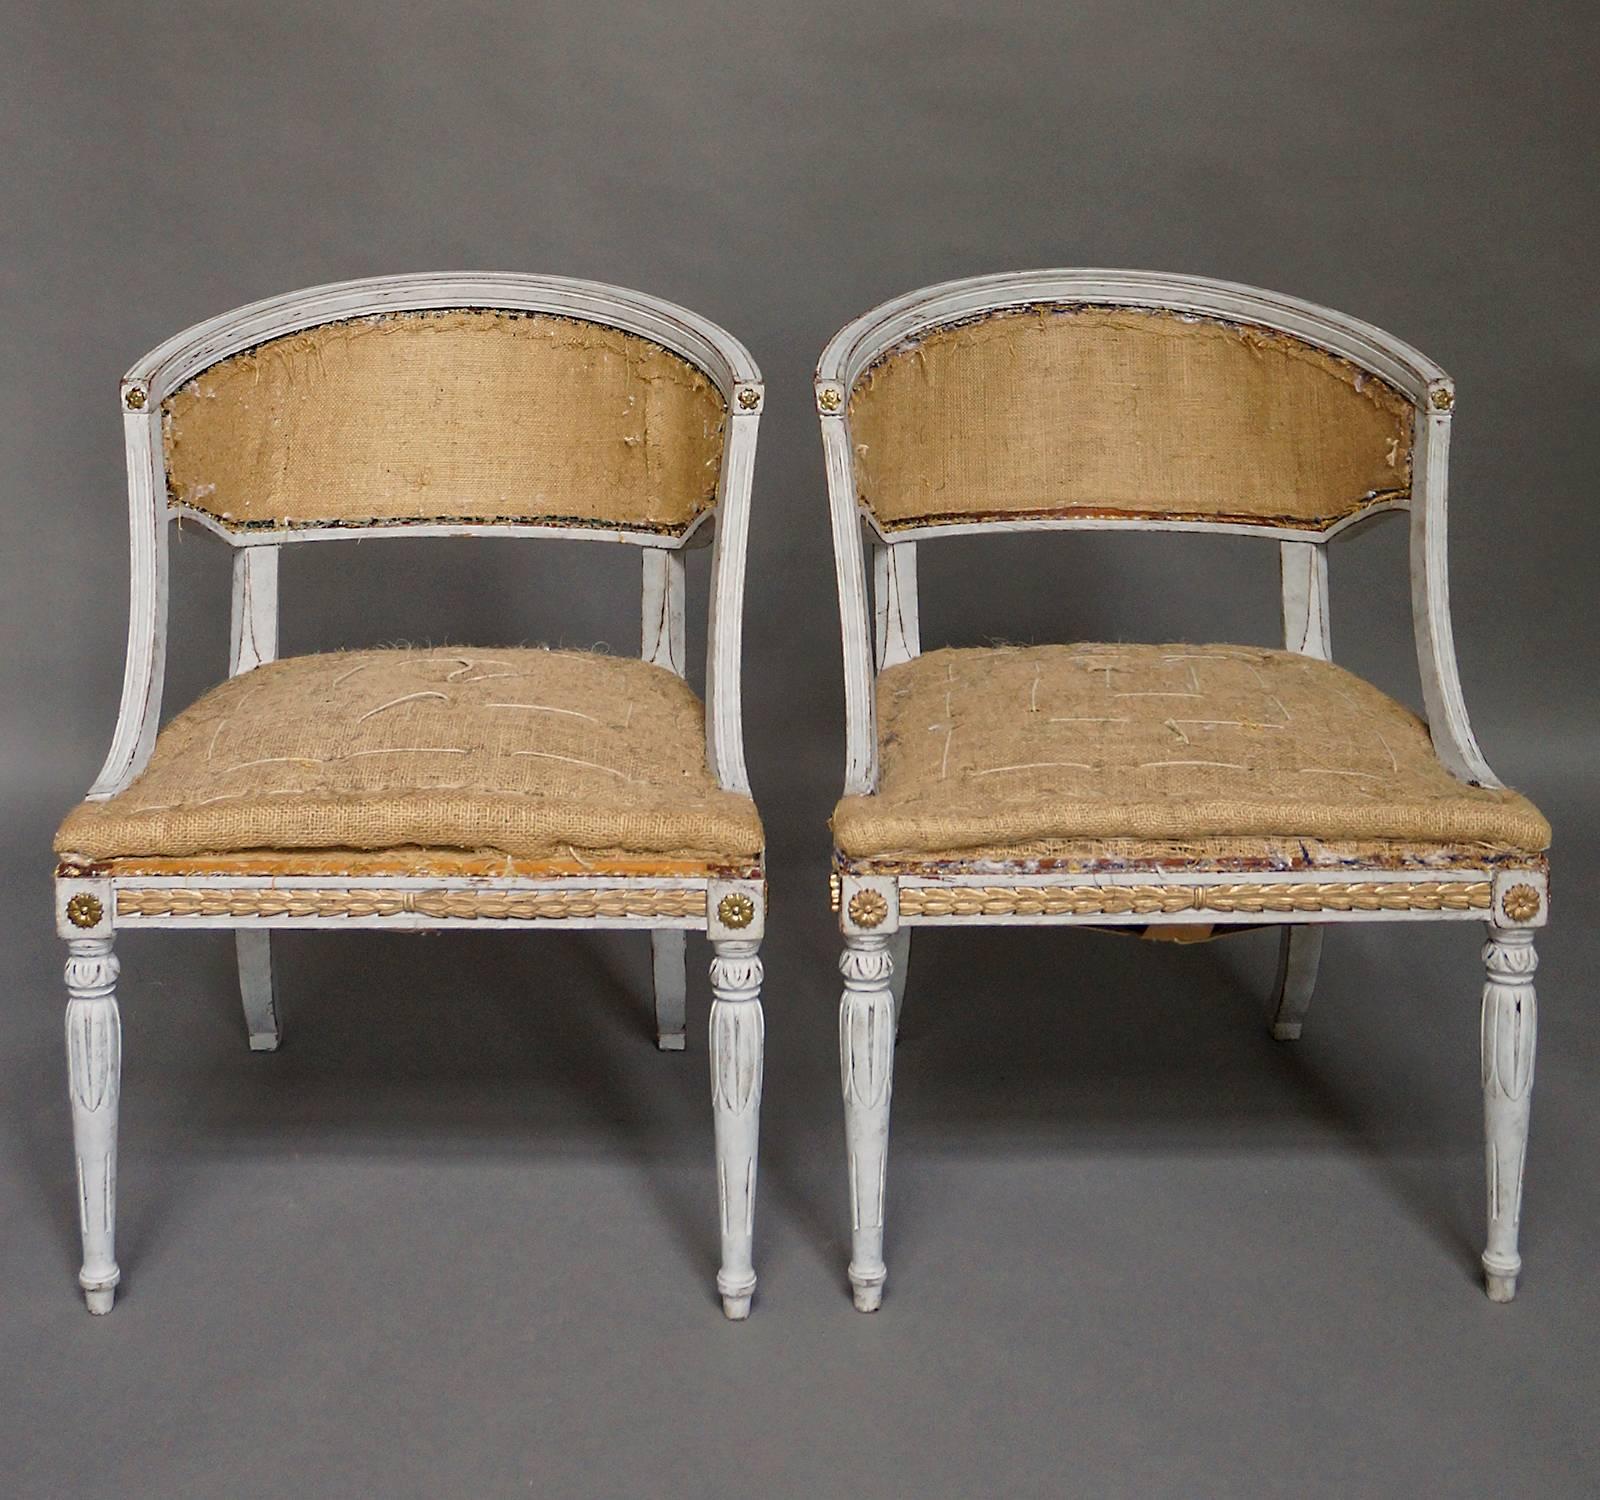 Pair of barrel back armchairs in the neoclassical style, Sweden, circa 1900. The front and side rails have inset gilded laurel leaf molding. A combination of gilt and brass rosettes mark the turnings of the arms and the corner blocks. Lotus carving